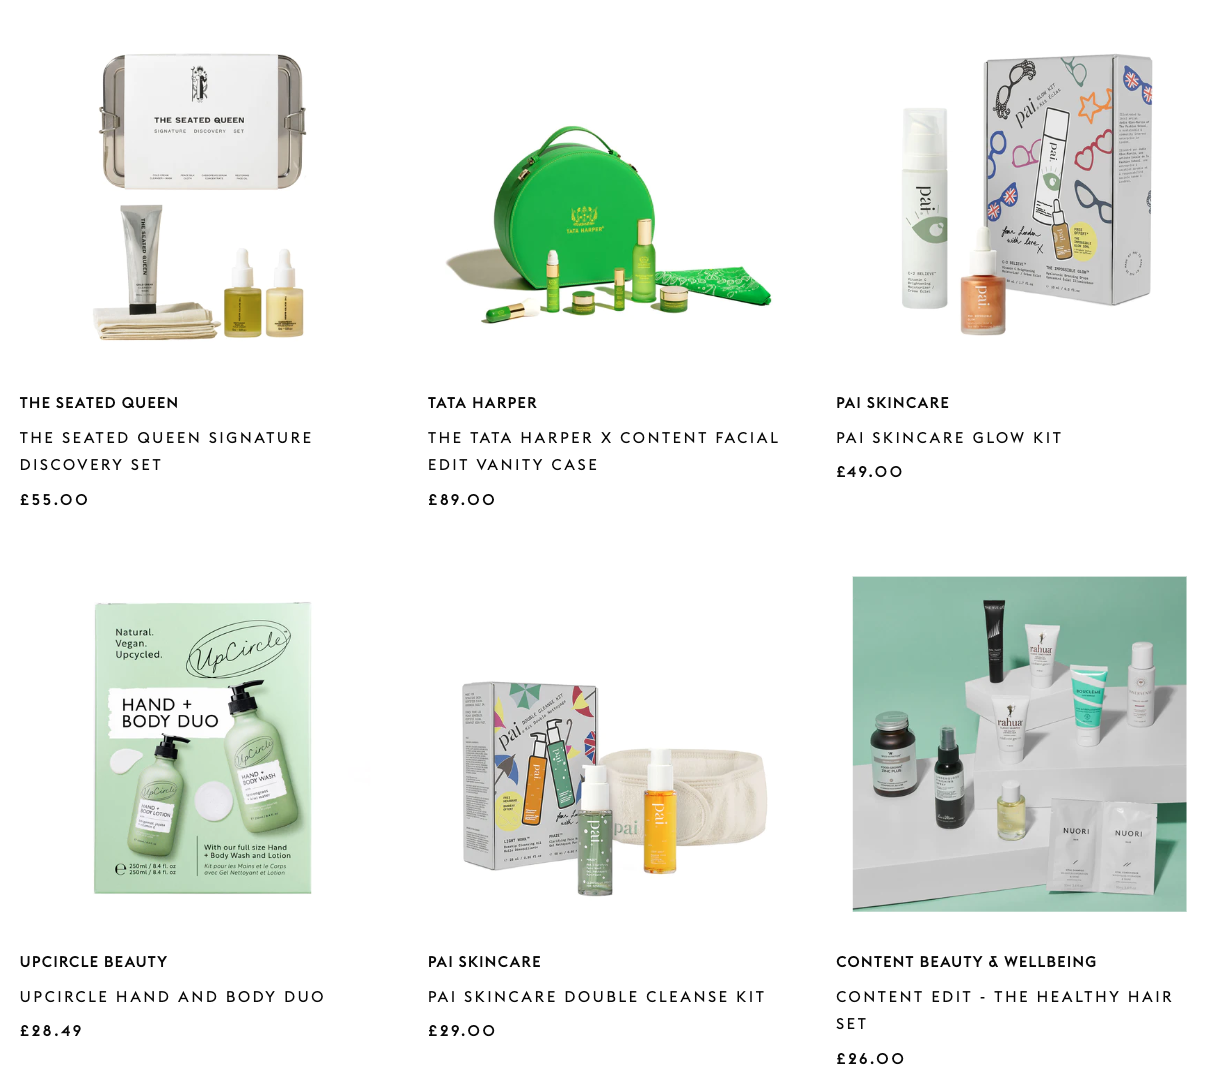 15% off when you purchase two or more gift sets and stocking fillers at Content Beauty & WellBeing